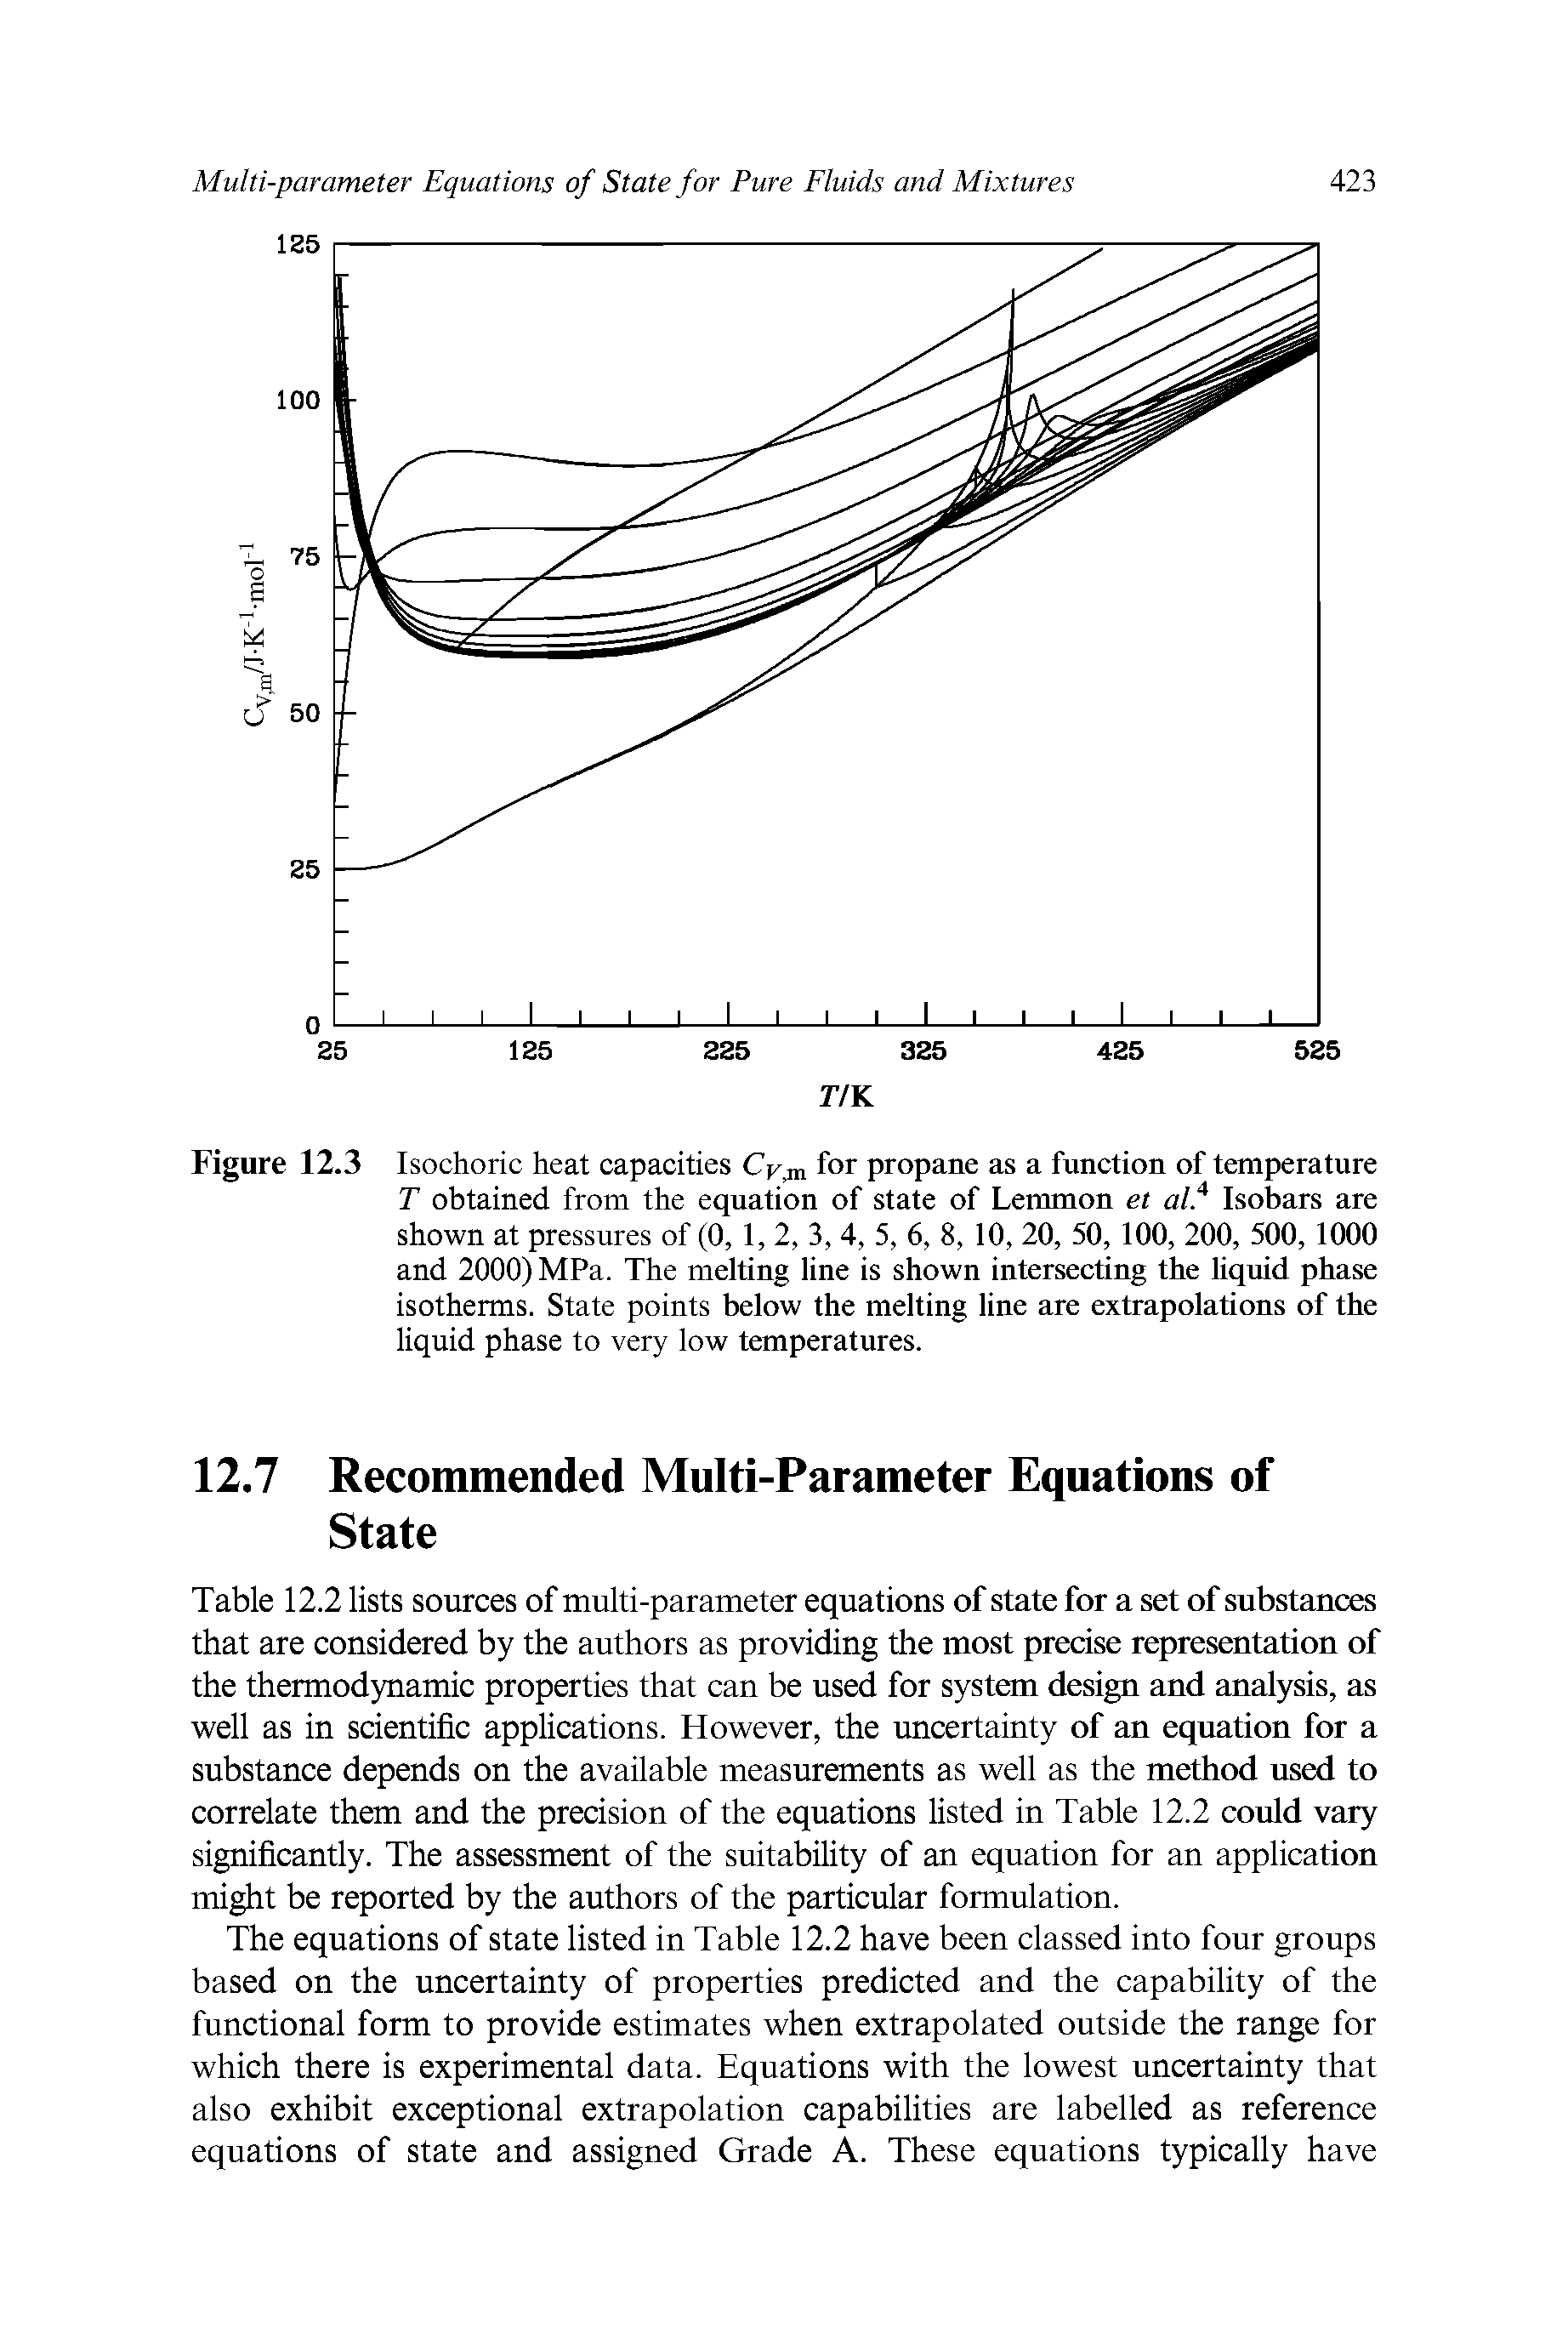 Figure 12.3 Isochoric heat capacities Cy for propane as a function of temperature T obtained from the equation of state of Lemmon et alf Isobars are shown at pressures of (0, 1,2, 3,4, 5, 6, 8,10, 20, 50,100, 200, 500,1000 and 2000) MPa. The melting line is shown intersecting the liquid phase isotherms. State points below the melting line are extrapolations of the liquid phase to very low temperatures.